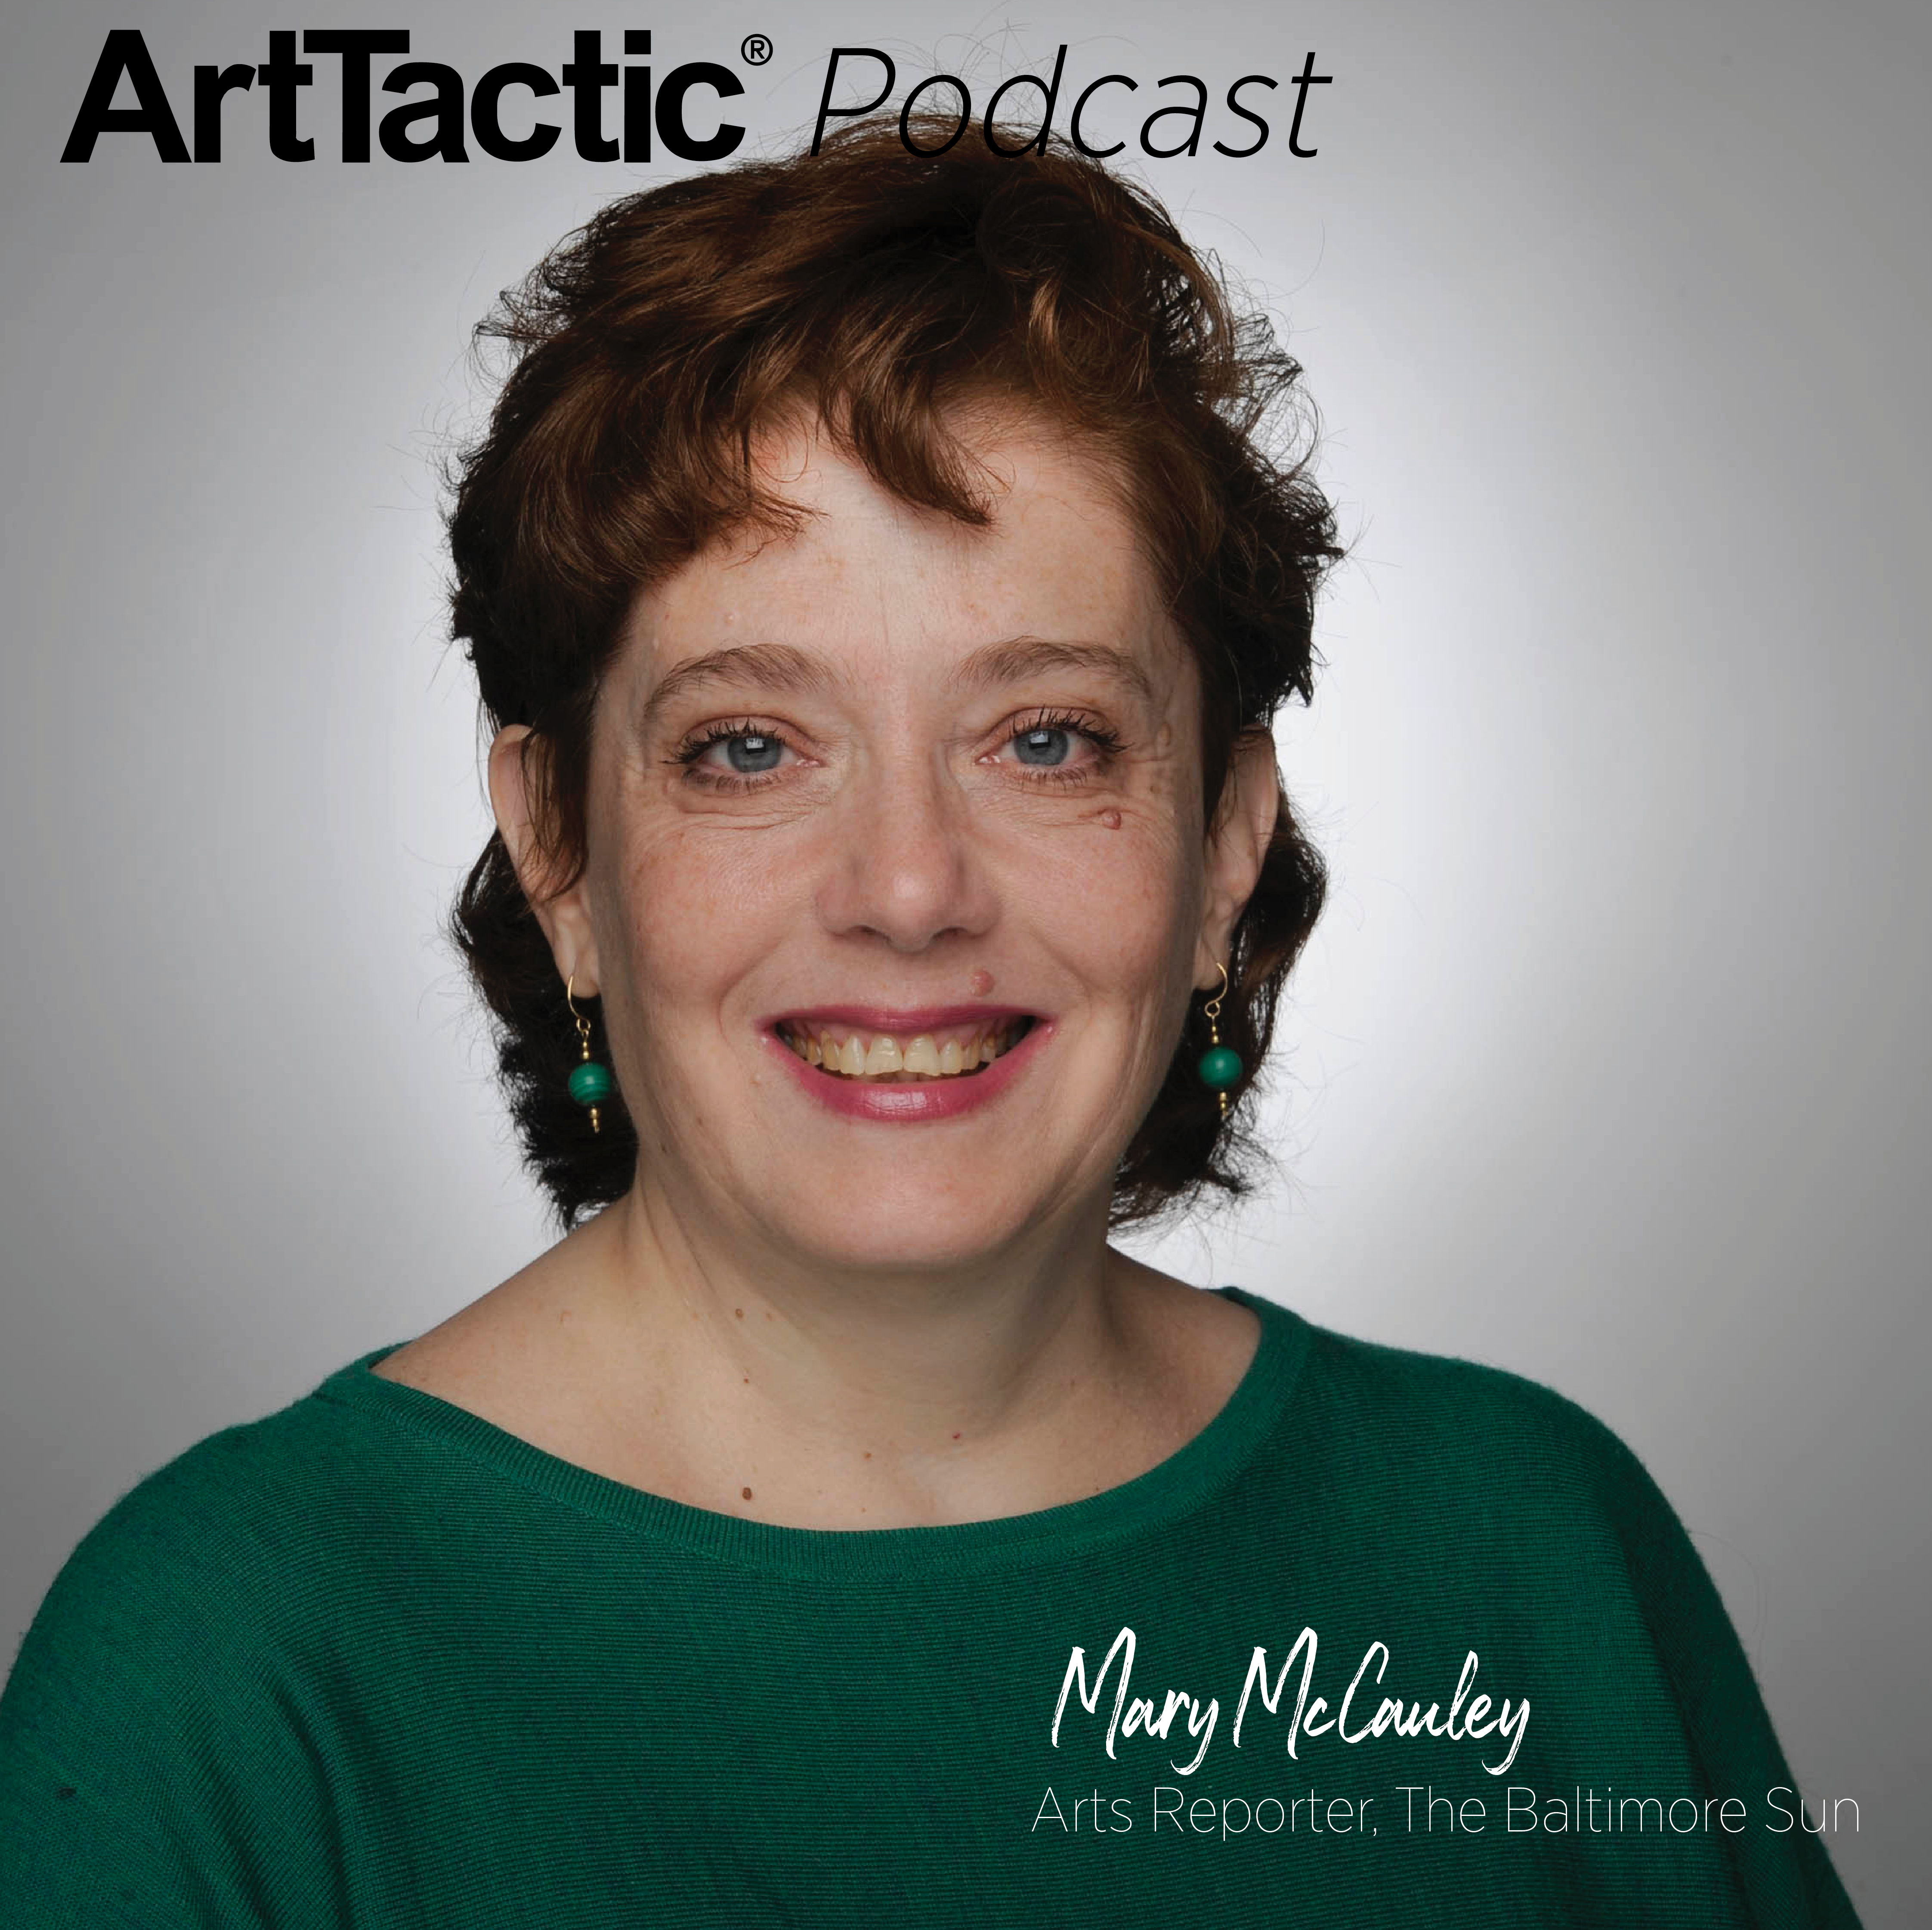 Mary McCauley ArtTactic Podcast